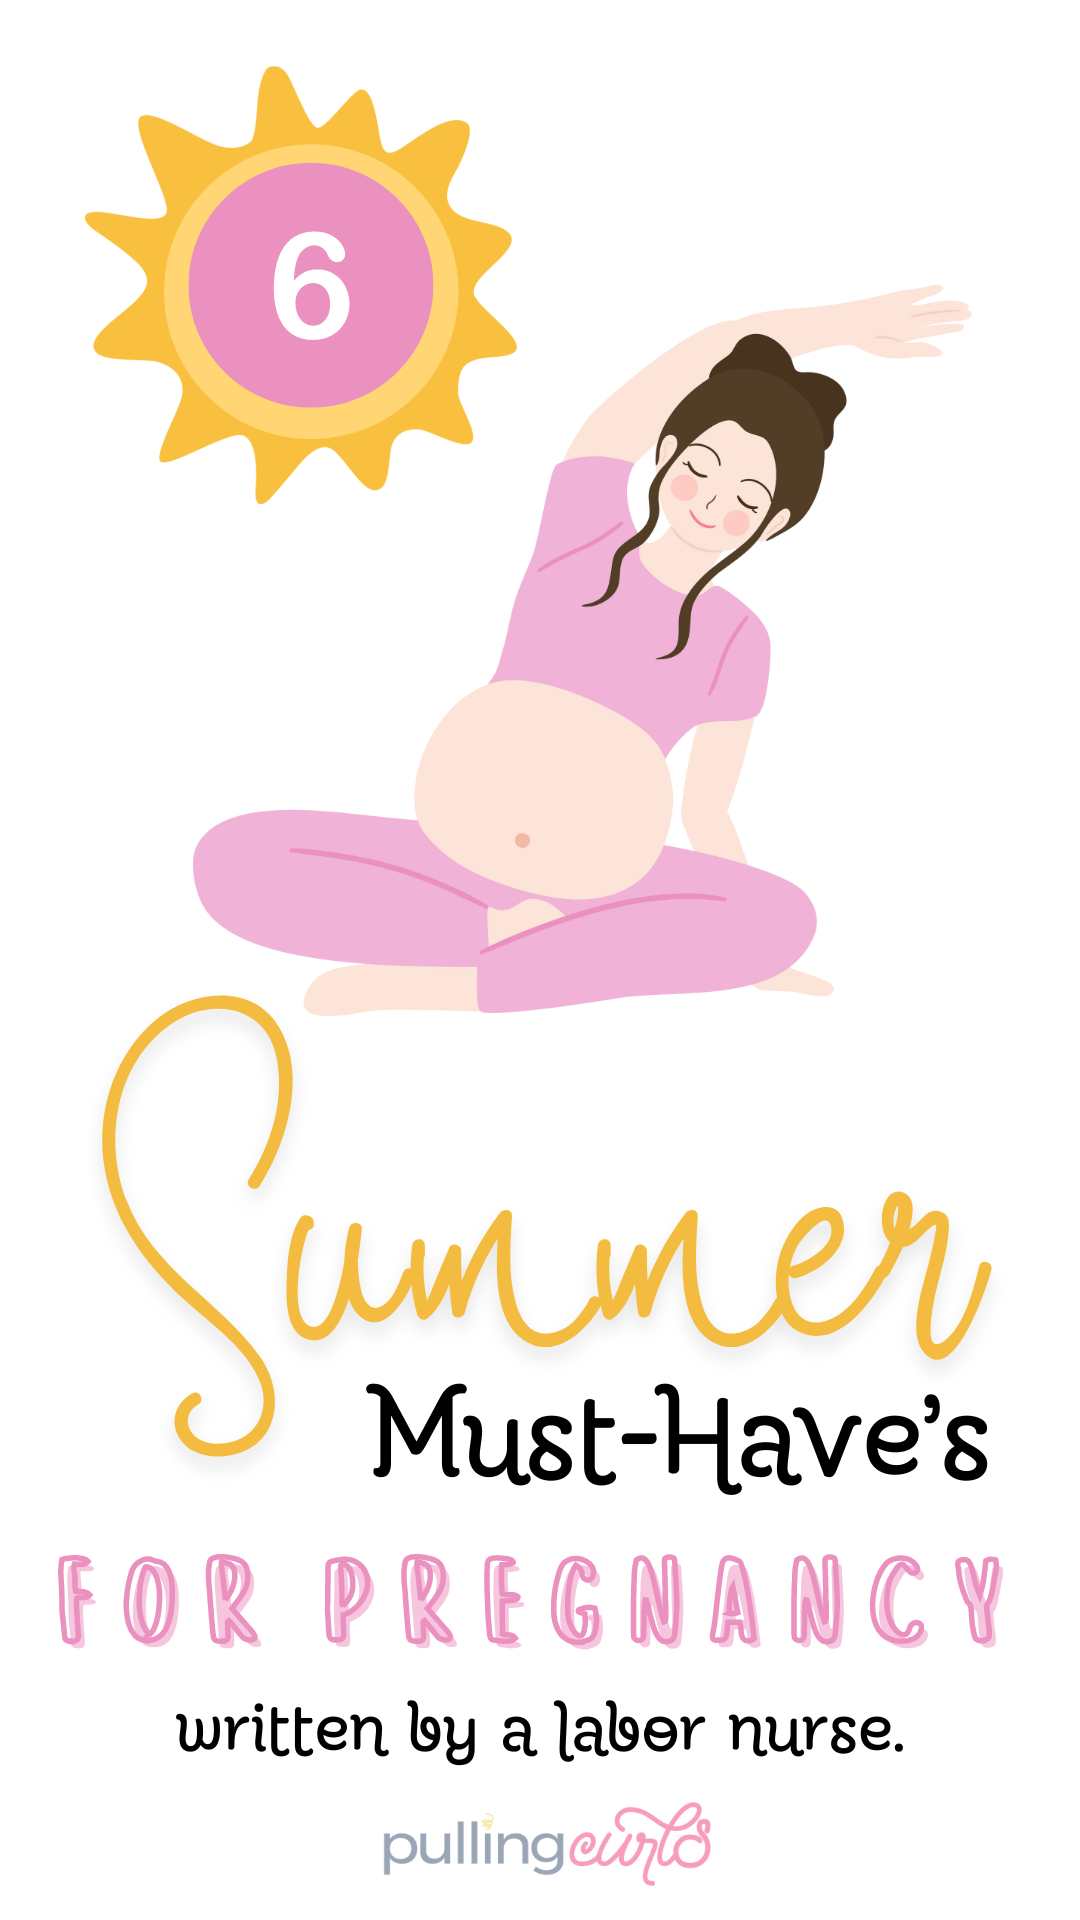 Are you pregnant this summer? Get ready to beat the heat with our essential survival guide. From hydration tips to the best swimwear, learn how to stay comfortable, healthy, and cool during your summer pregnancy. Bonus: Meet Hilary, The Pregnancy Nurse® with 20 years of experience! via @pullingcurls